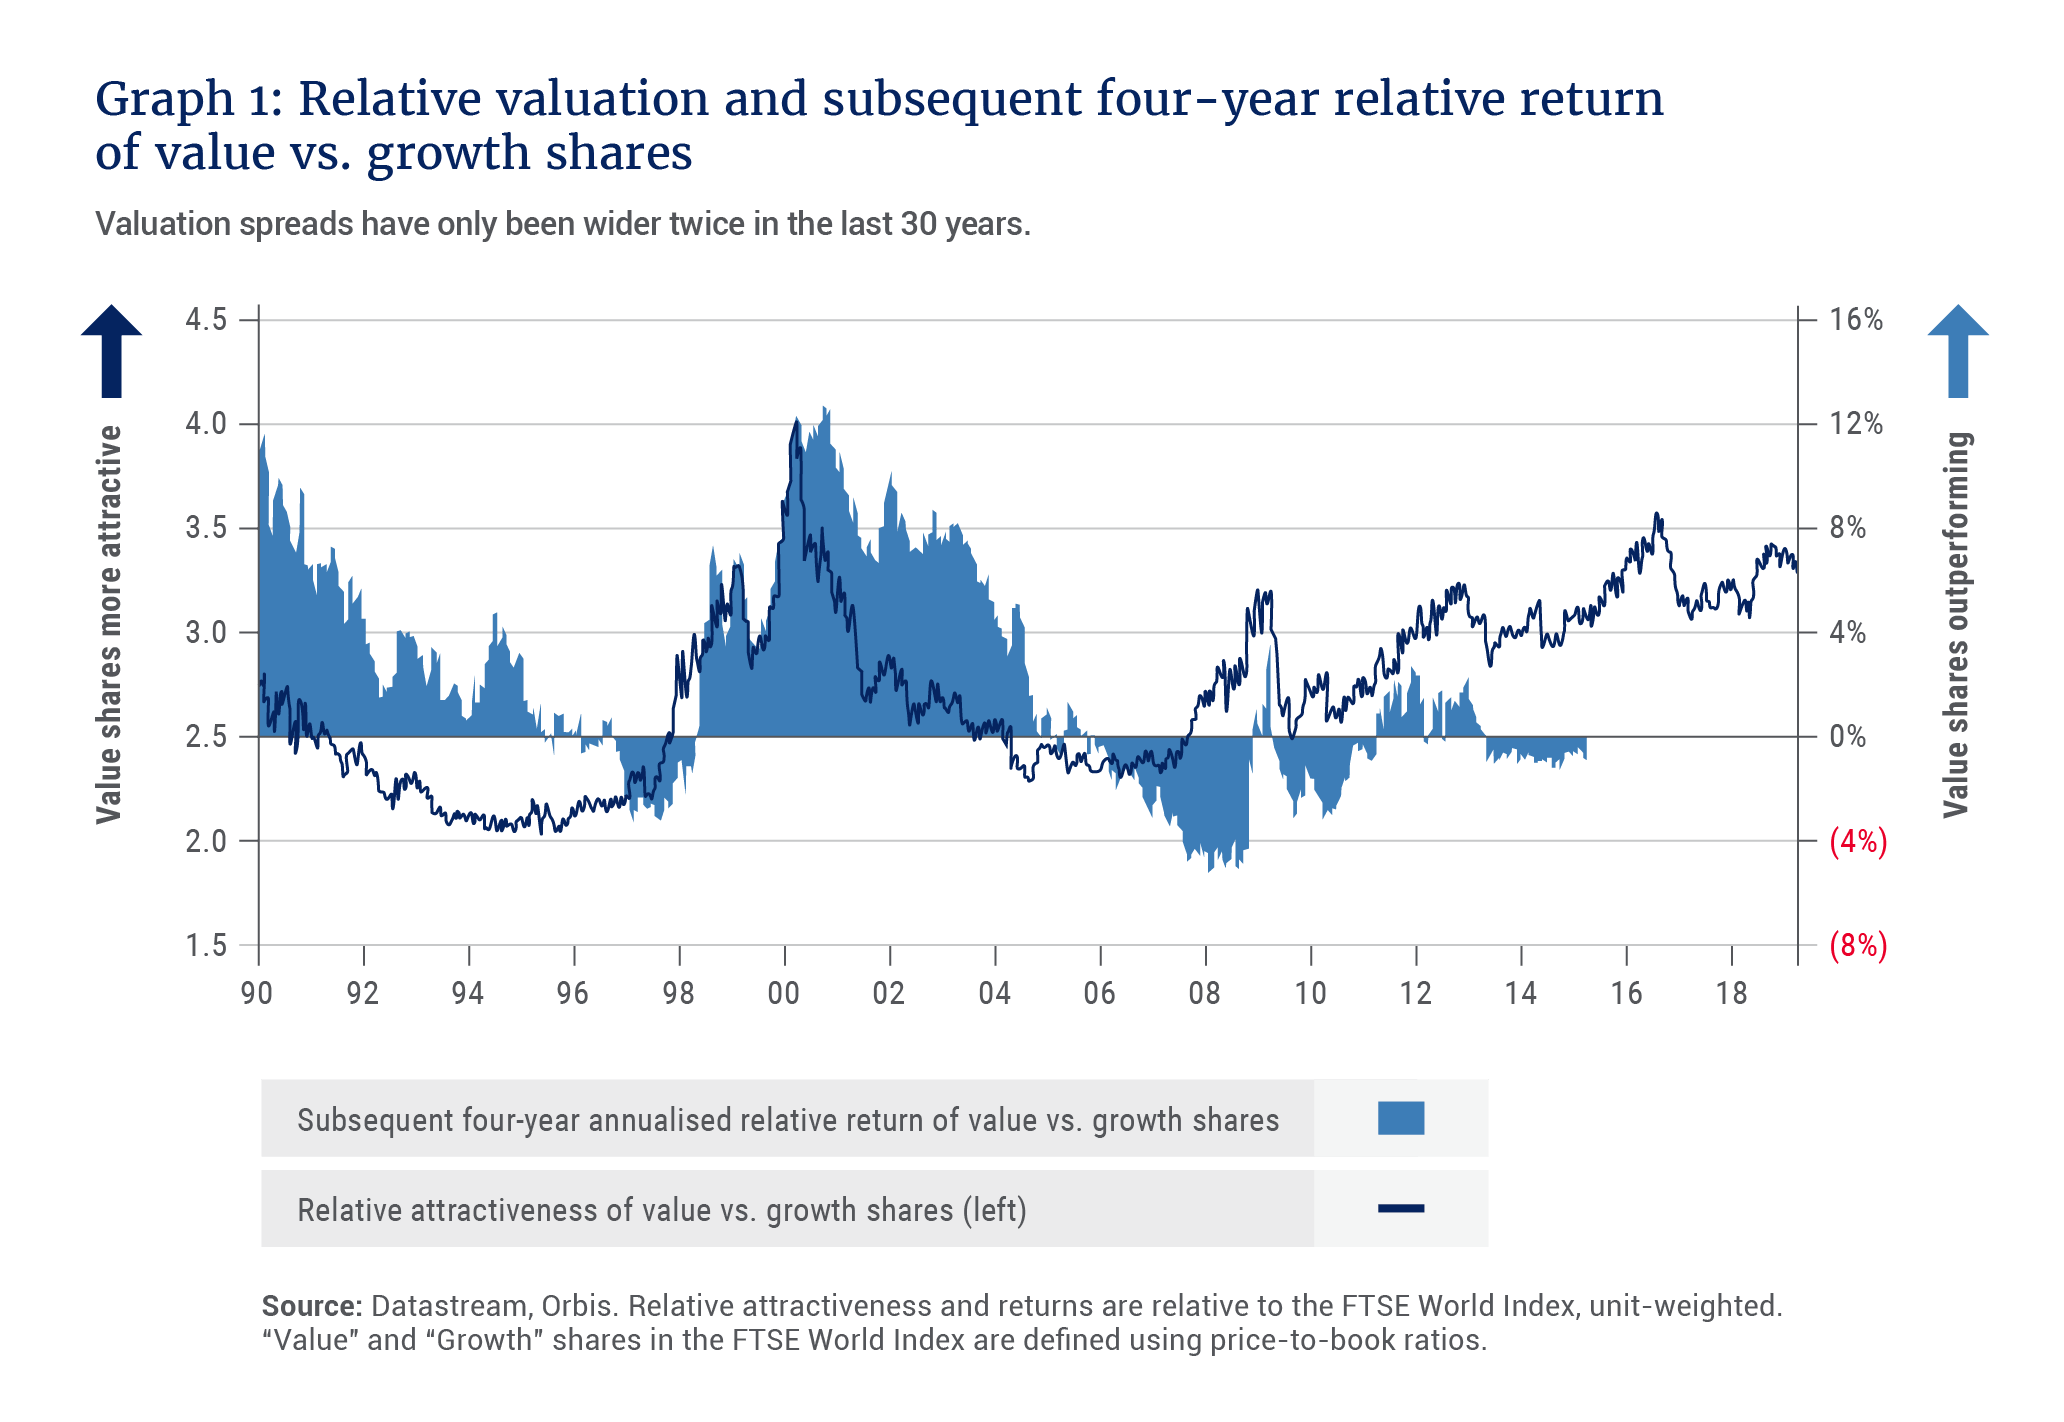 Relative valuation and subsequent four-year relative return of value vs growth shares - Allan Gray